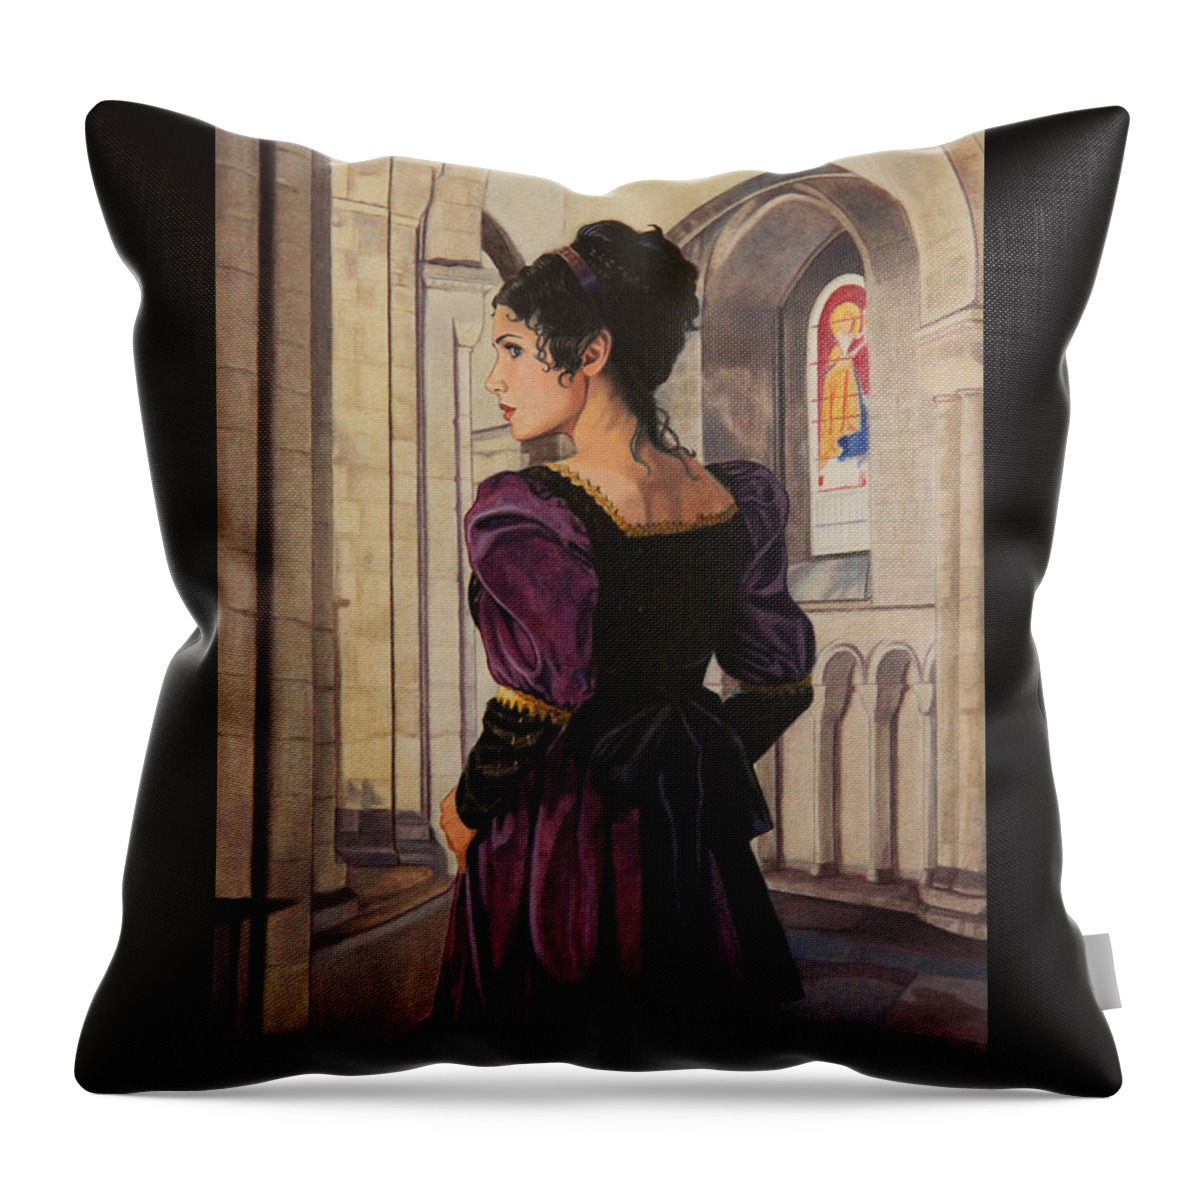 Whelan Art Throw Pillow featuring the painting Northanger Abbey by Patrick Whelan